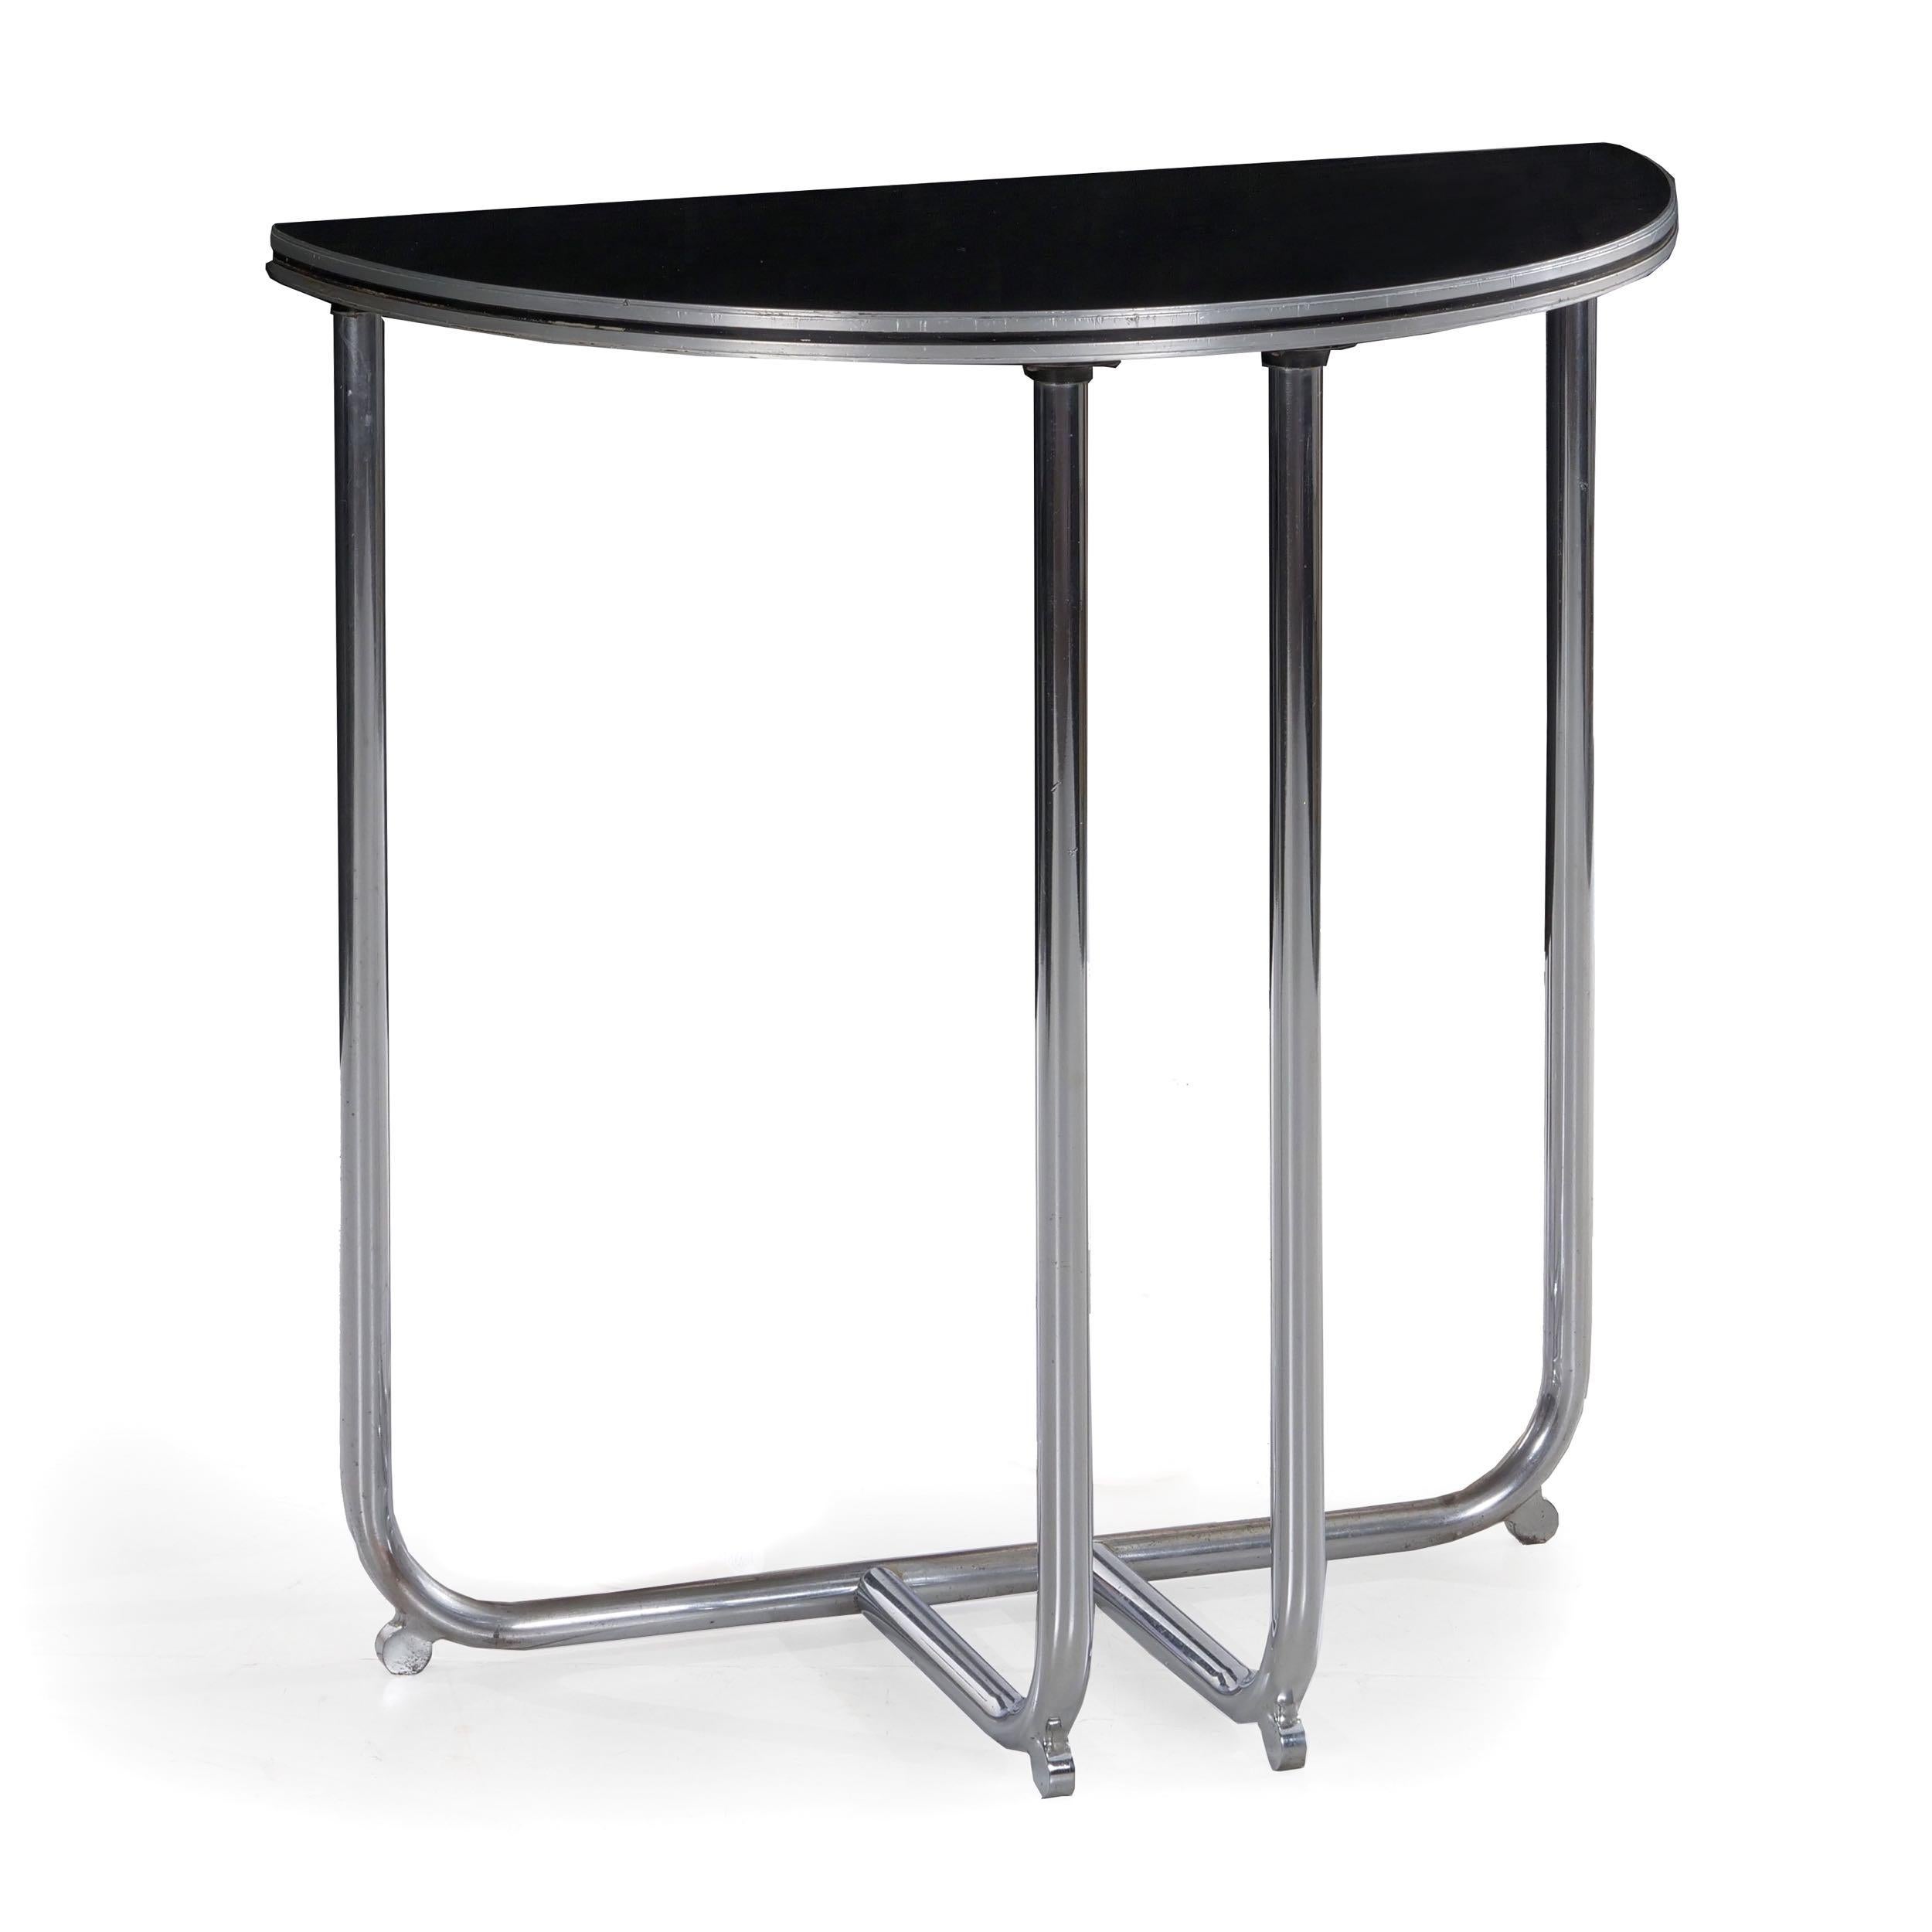 A machine age creation manufactured by Royalchrome in the manner of Wolfgang Hoffman, Donald Deskey and the other luminaries of the Streamline Moderne movement, this gorgeous demilune console table is crafted of bent tubular steel with small round